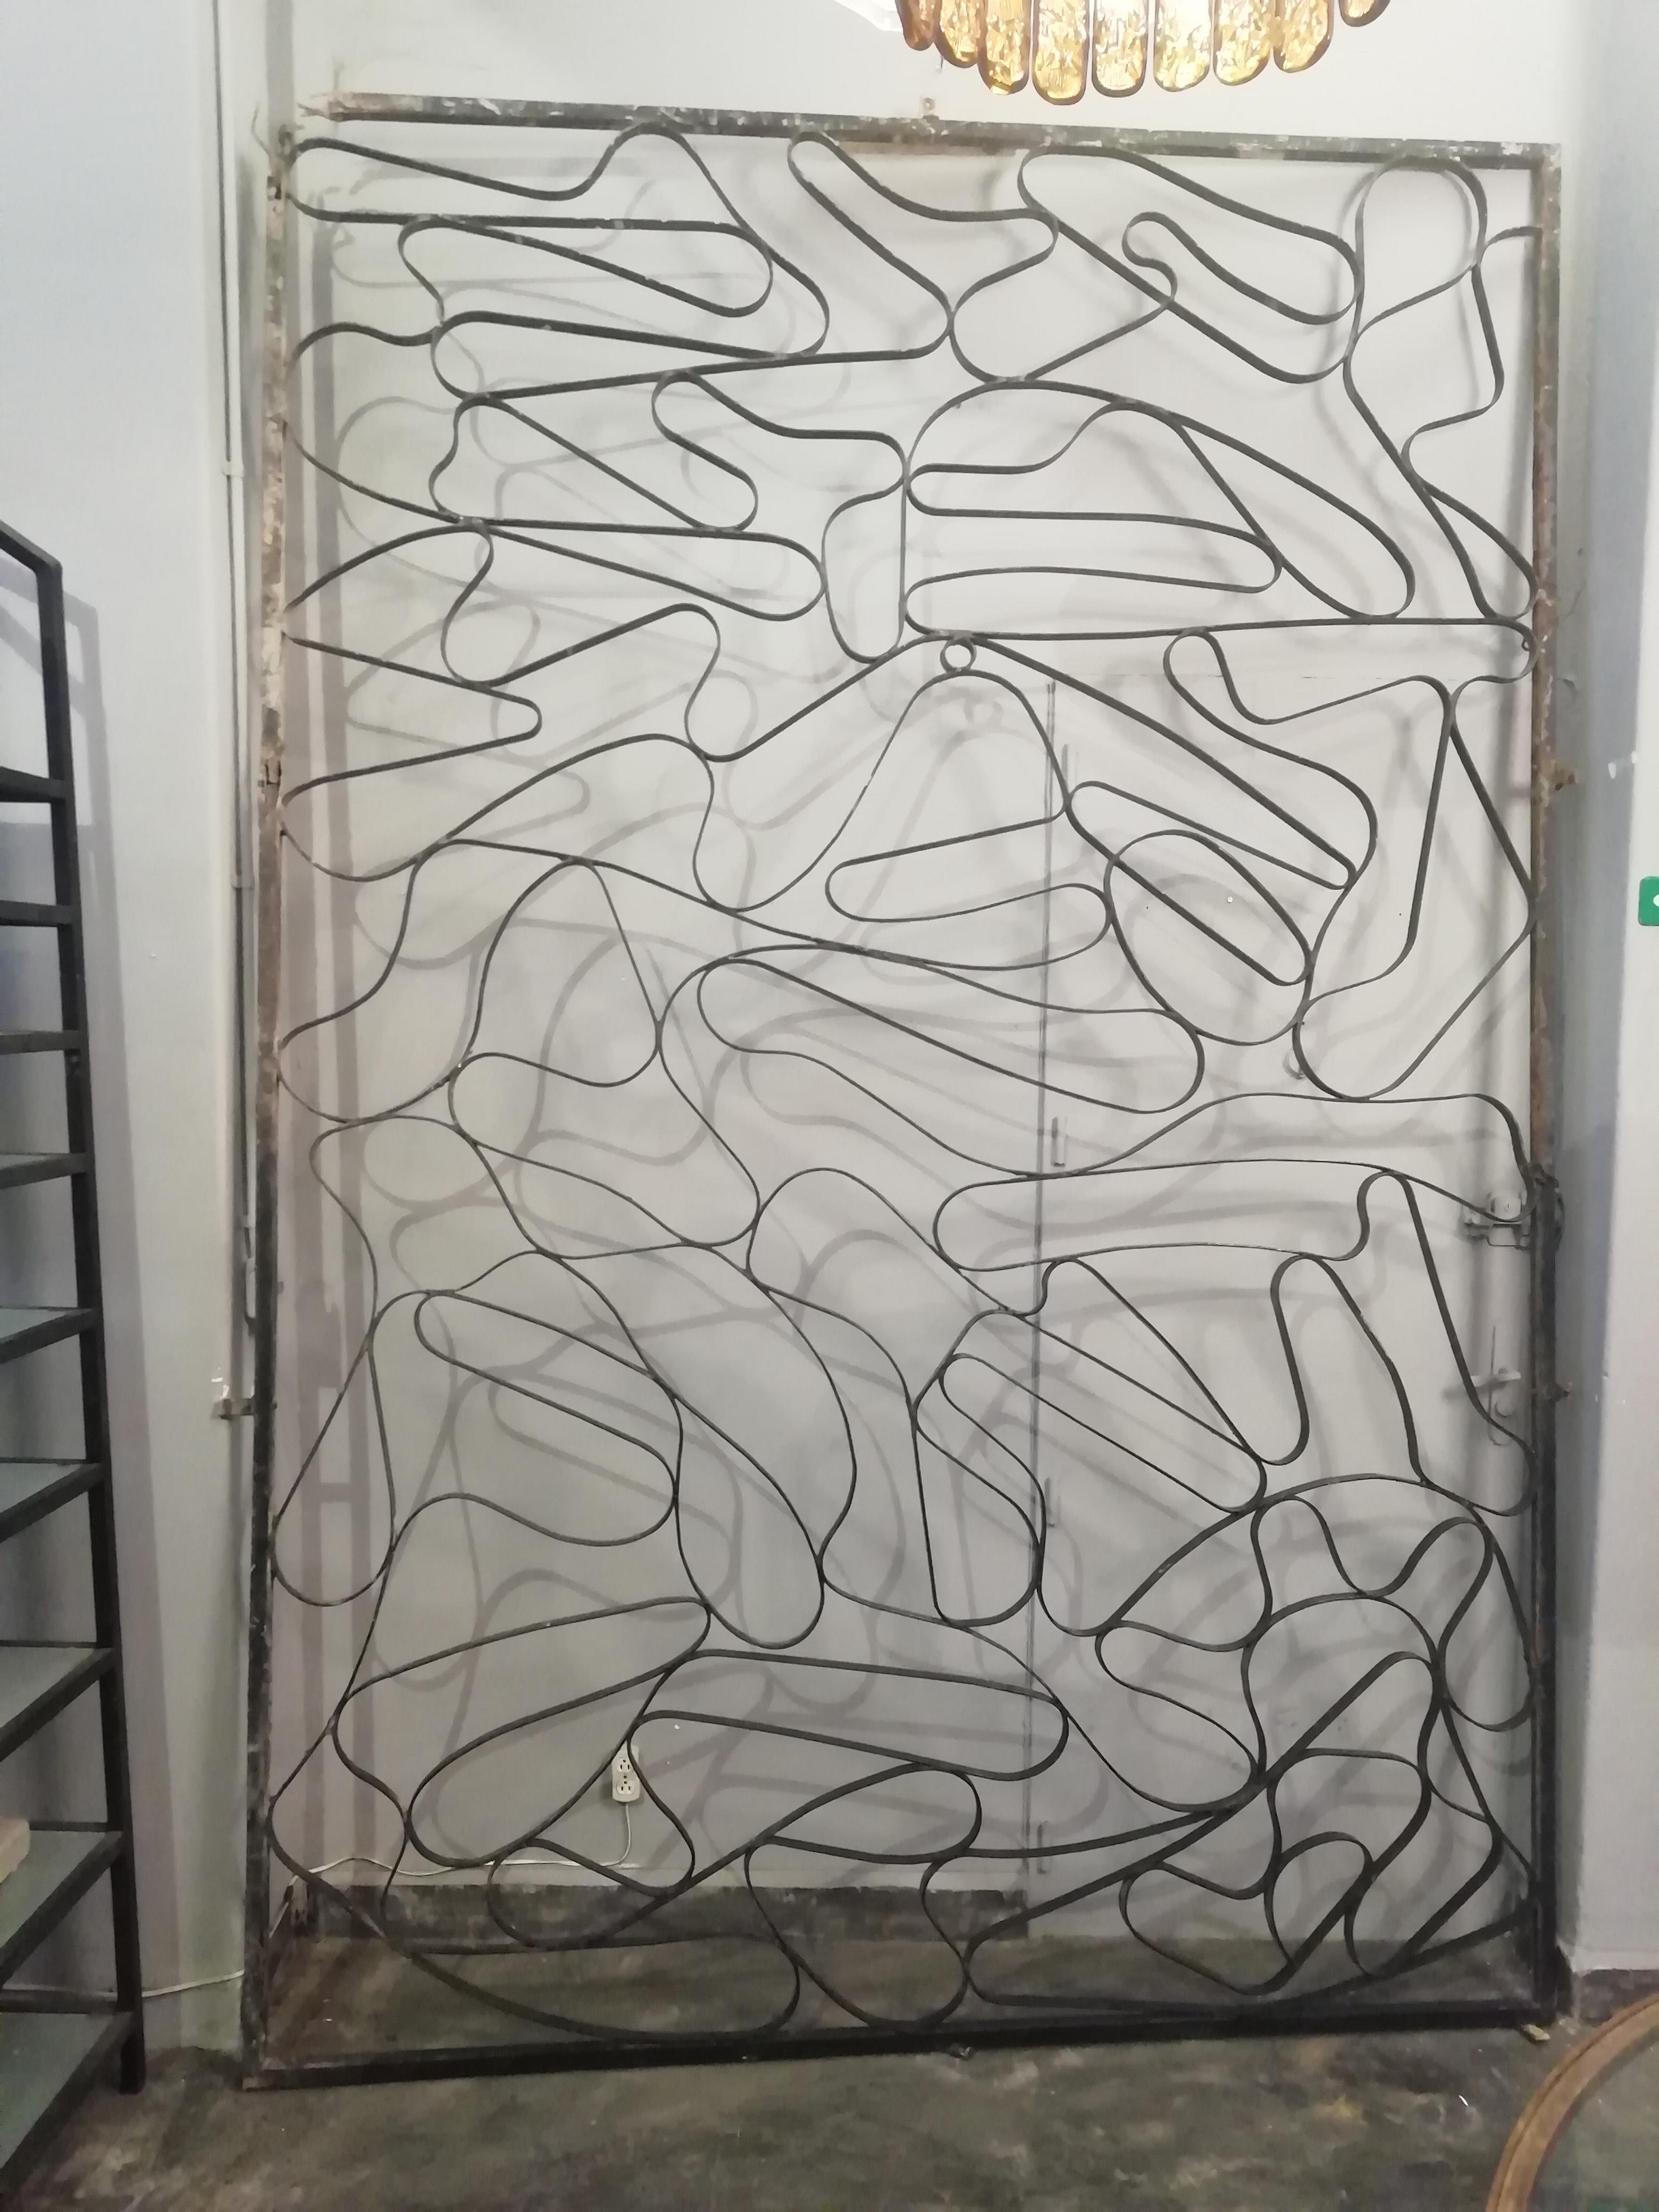 Interesting 1970s Mexican Mid-Century Modern steel screen. The organic design can be used as the frame for a stained glass window.